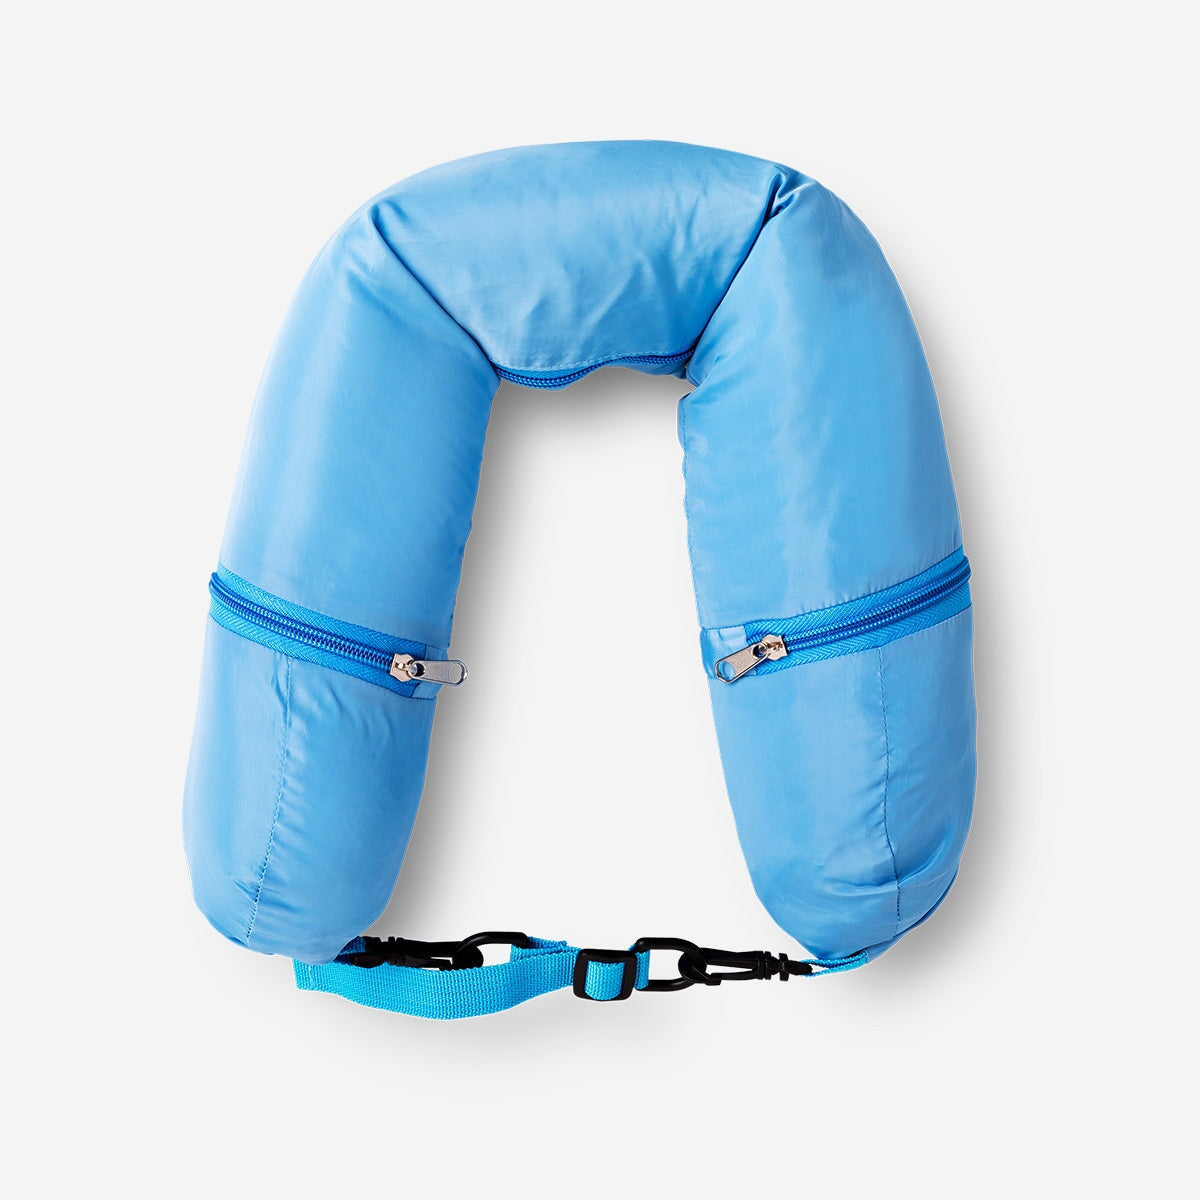 Image of Travel pillow. Fill with clothes